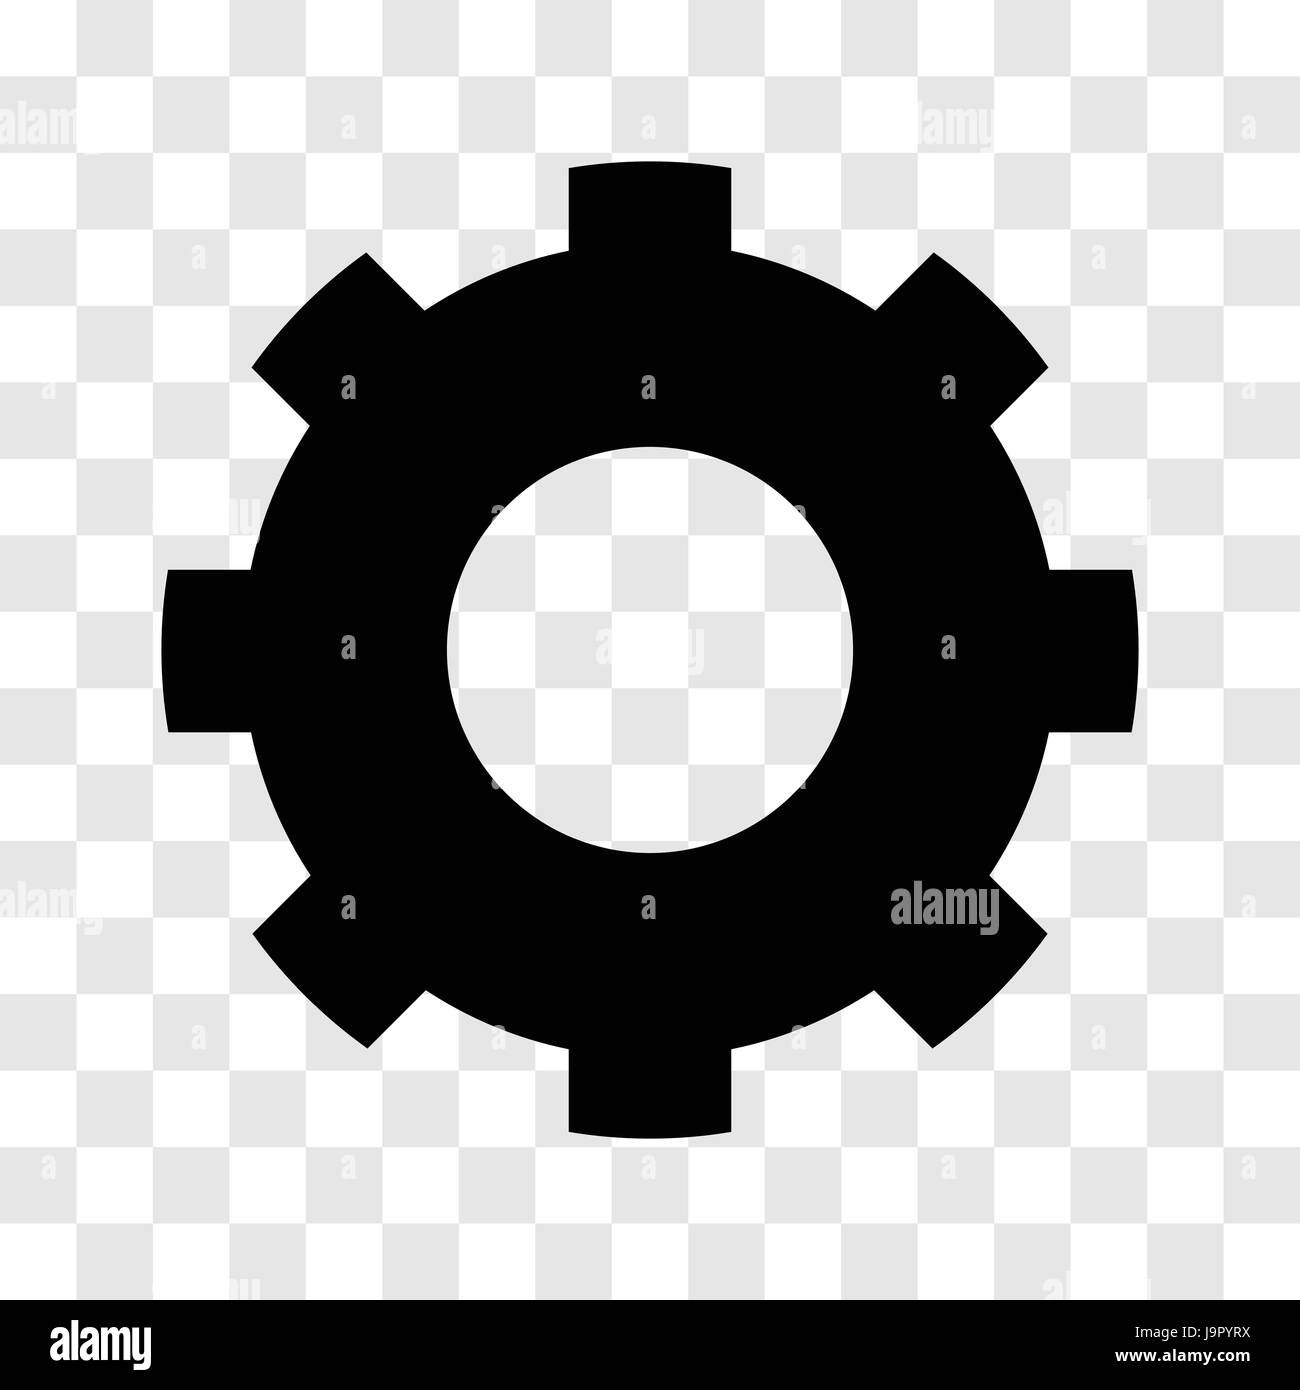 Gear icon, iconic symbol on transparency grid.  Vector Iconic Design. Stock Vector